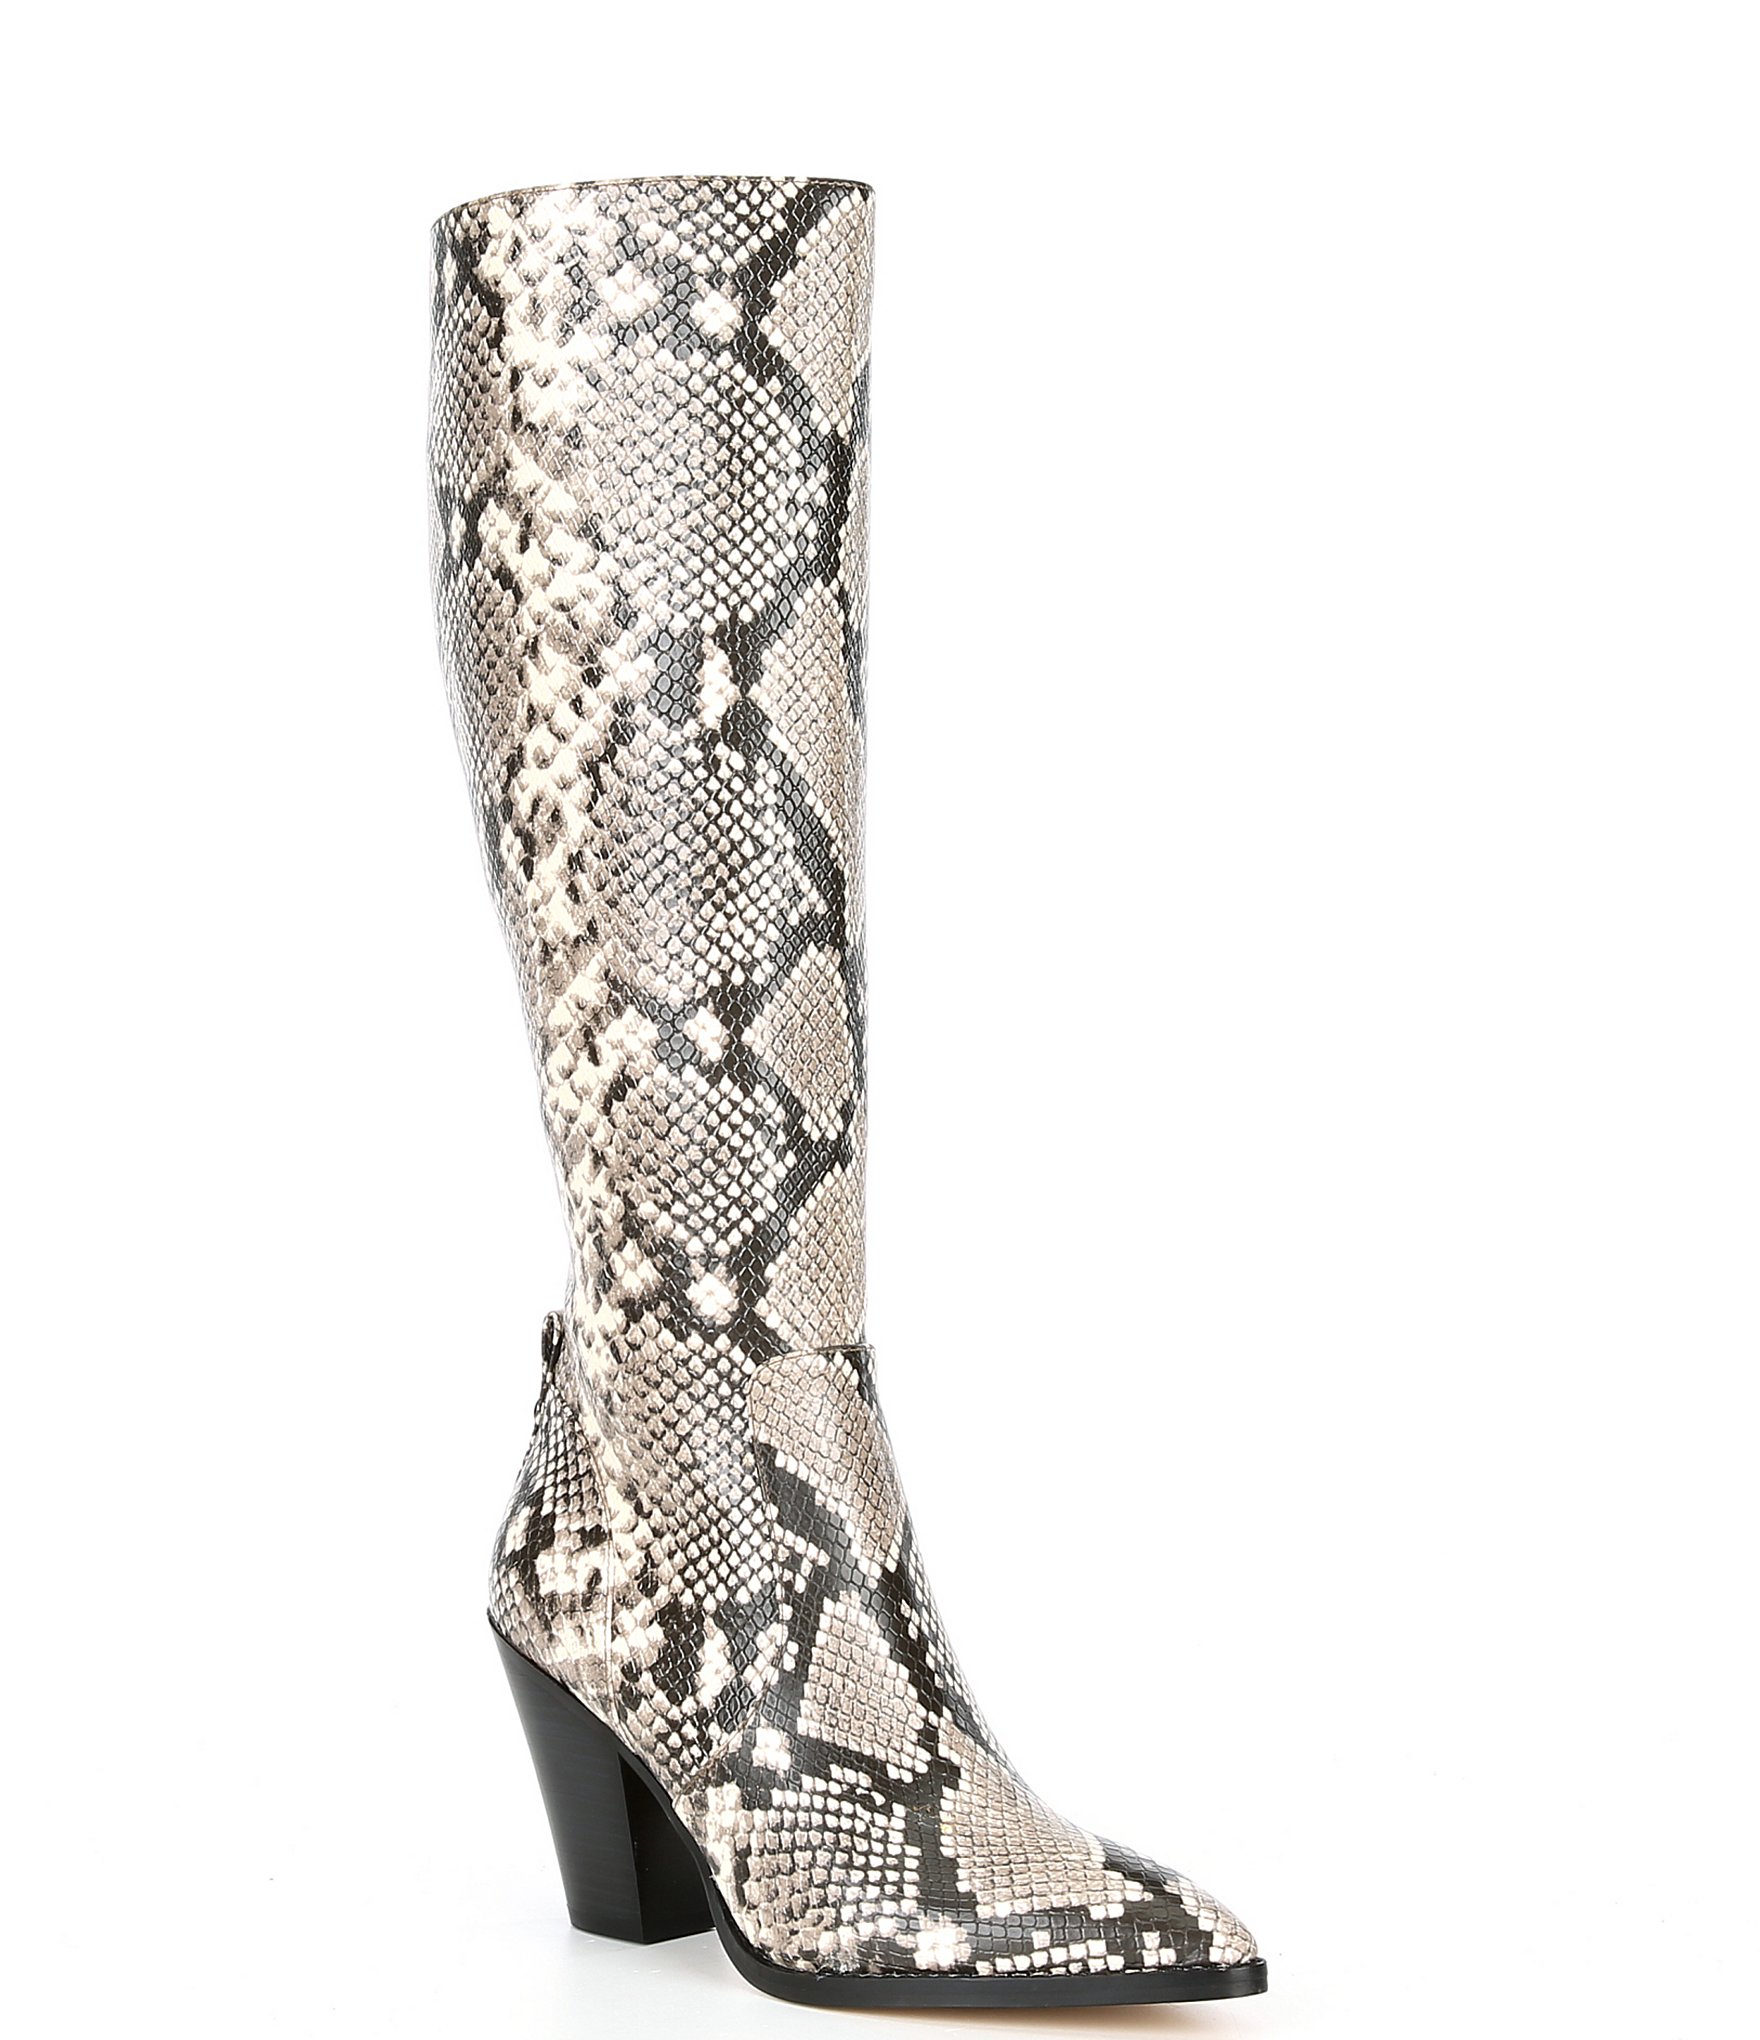 Michael Kors Dover Snake Embossed Leather Tall Boots | Dillard's